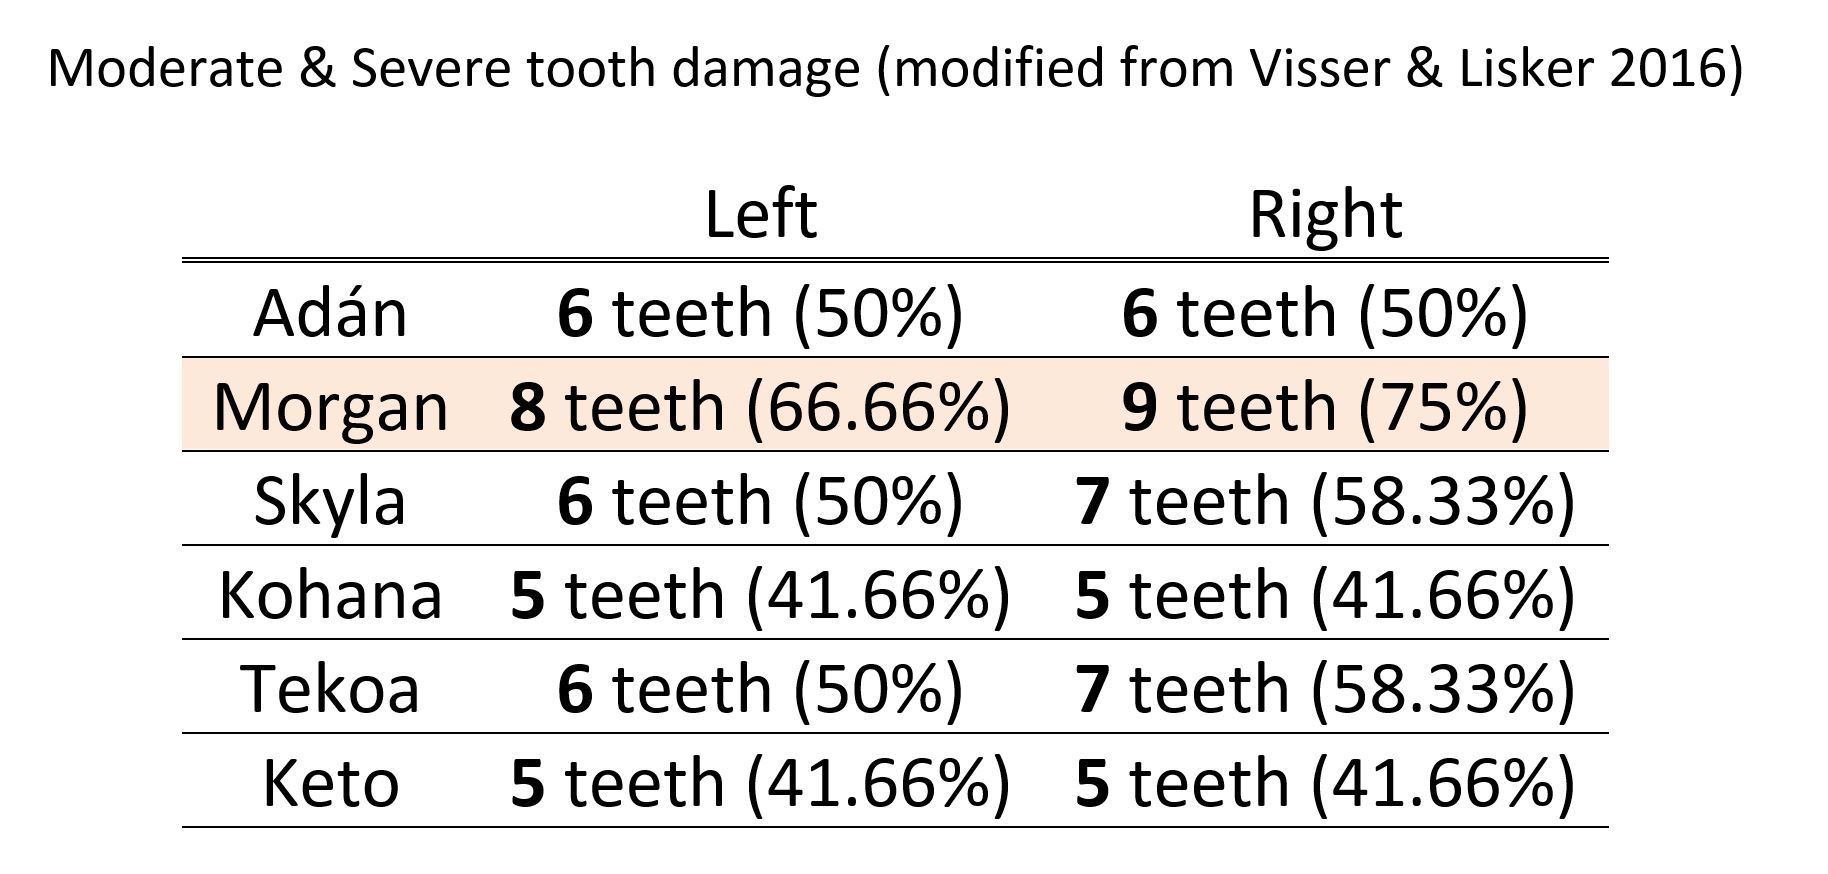 Number of teeth and percentage (assuming 12 teeth on each jaw) of moderately and severely damaged mandibular teeth